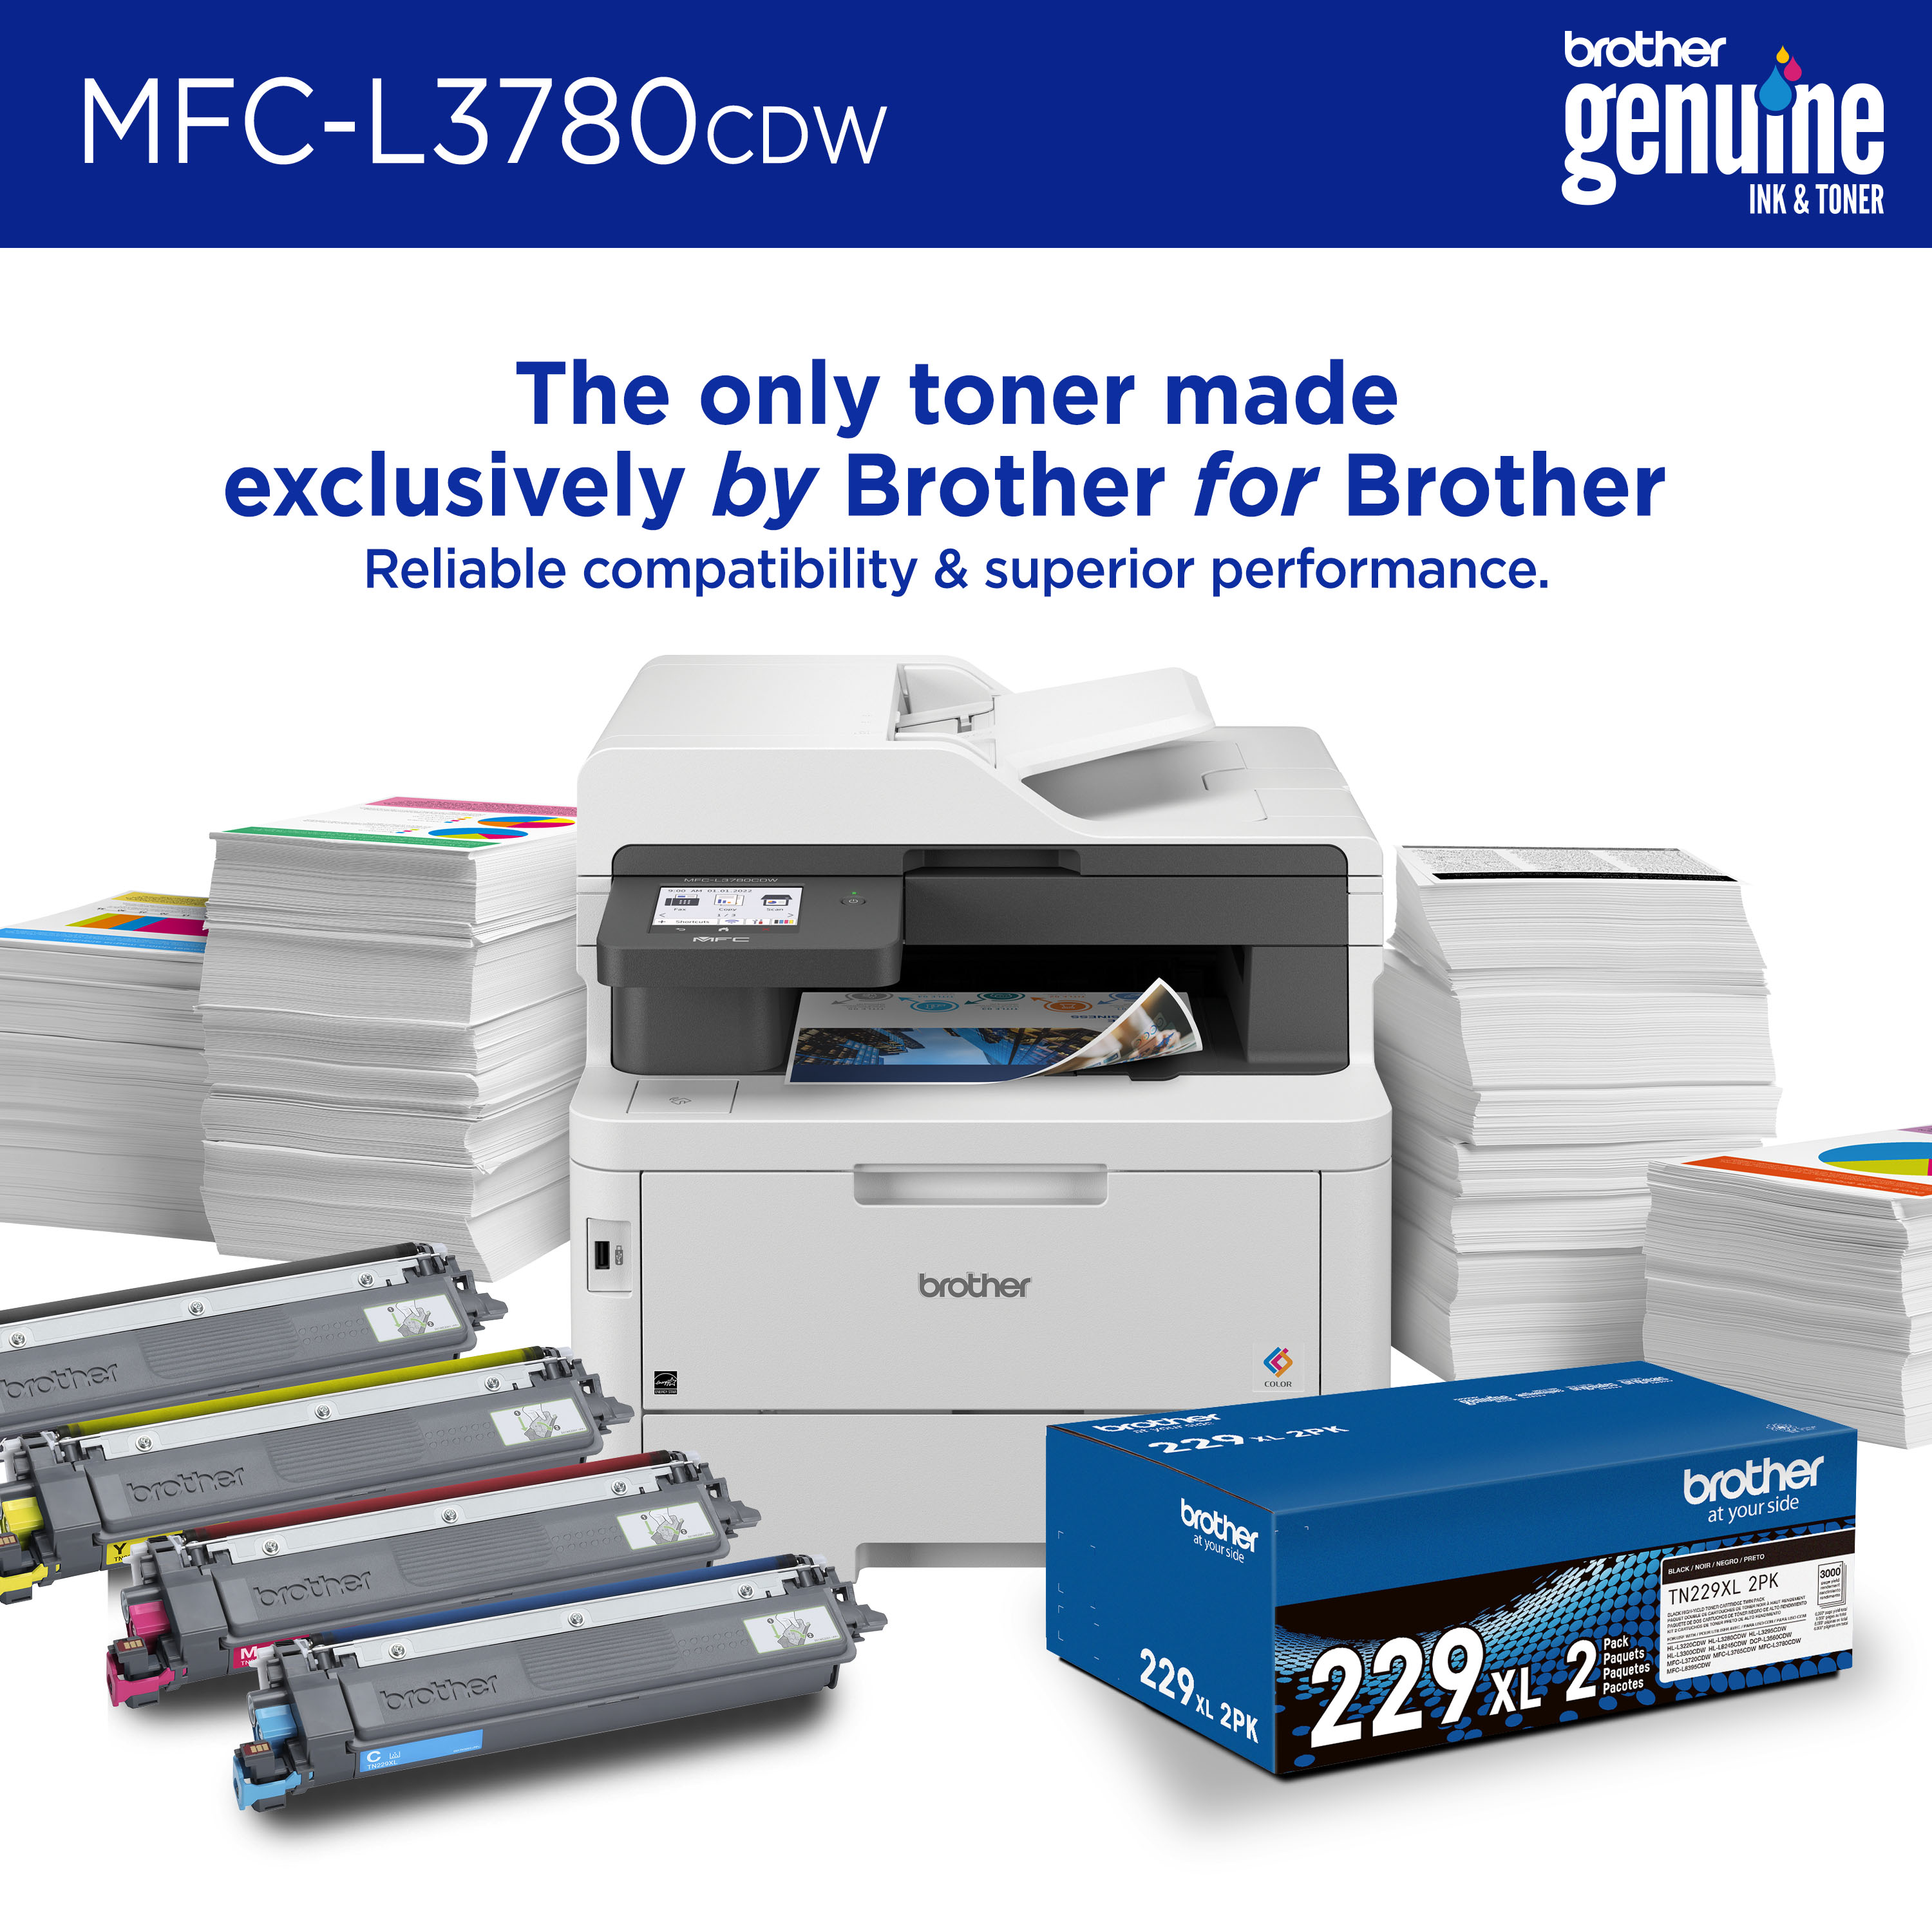 Digital Color All-in-One Printer with Laser Quality, Copy, Scan, and Fax,  Single Pass Duplex Copy and Scan, Duplex and Mobile Printing, Gigabit 